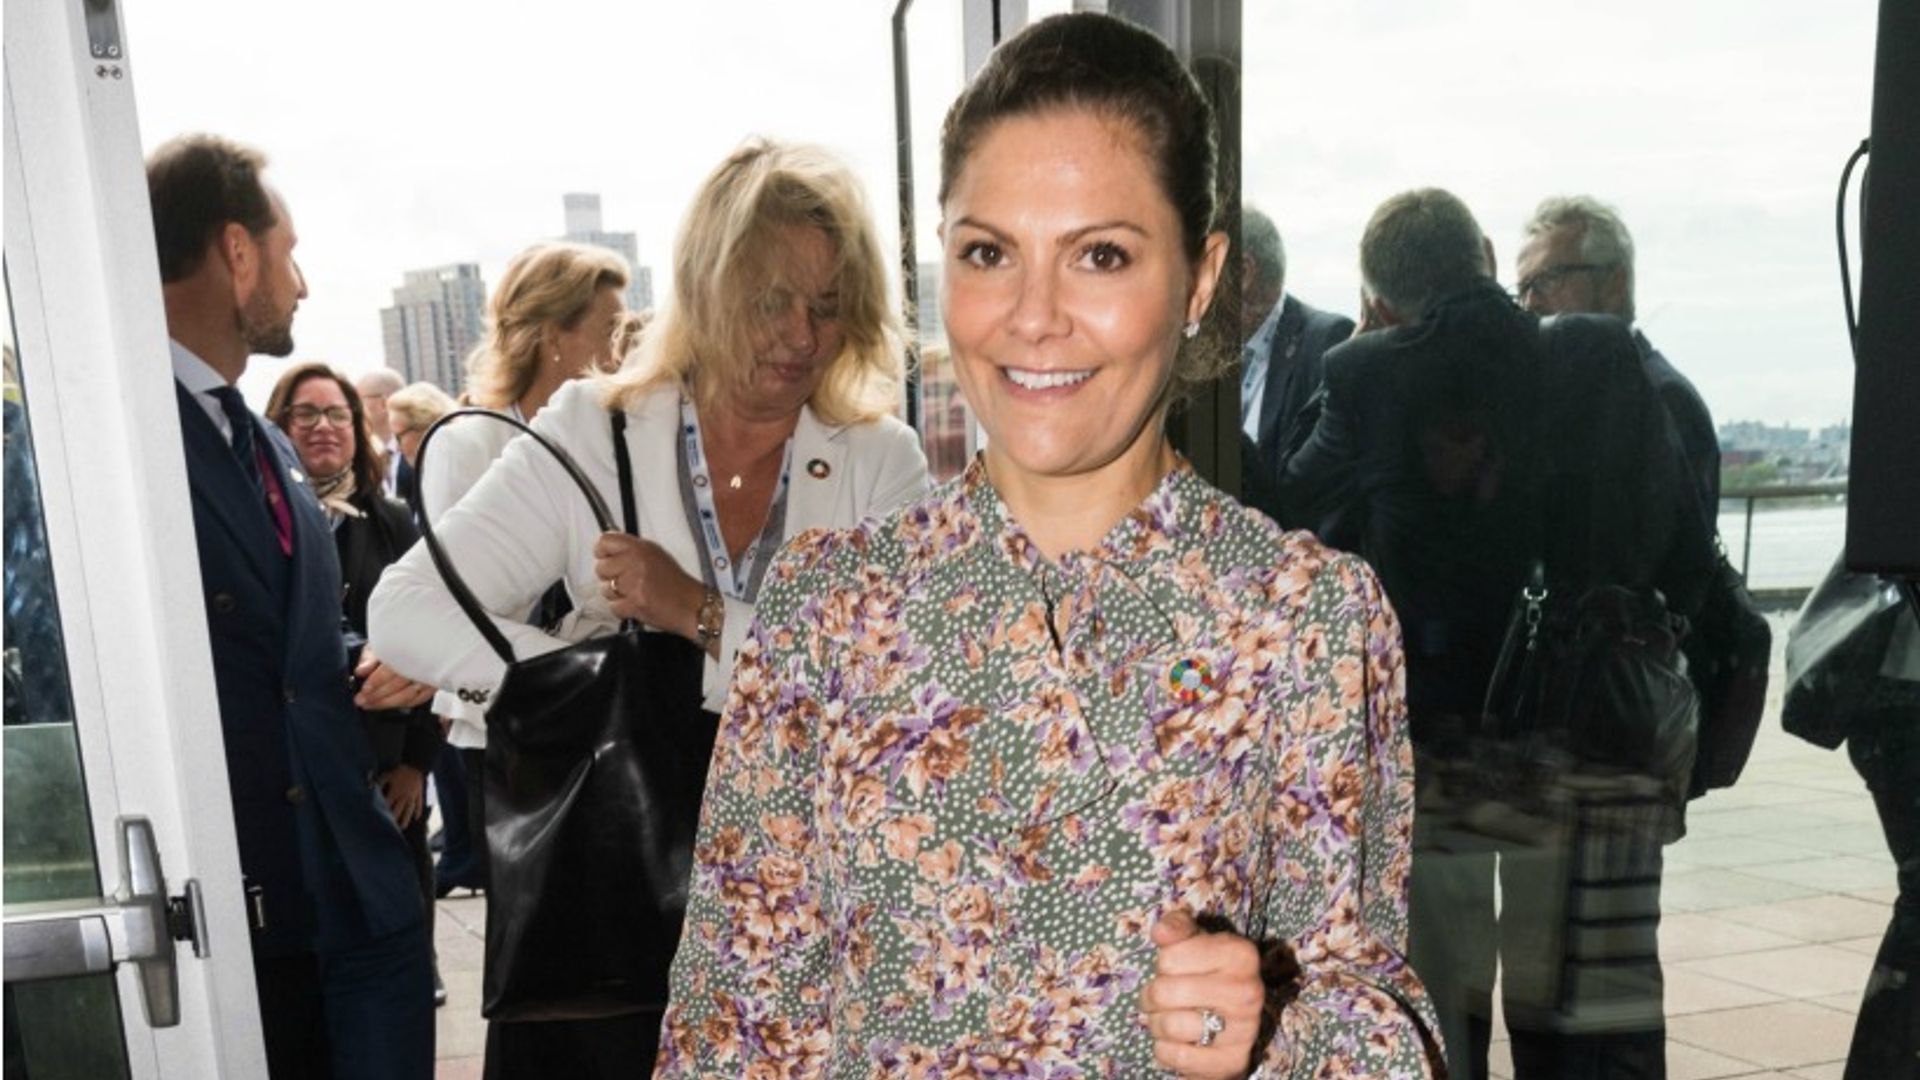 Princess Victoria of Sweden wows in eye-catching floral dress